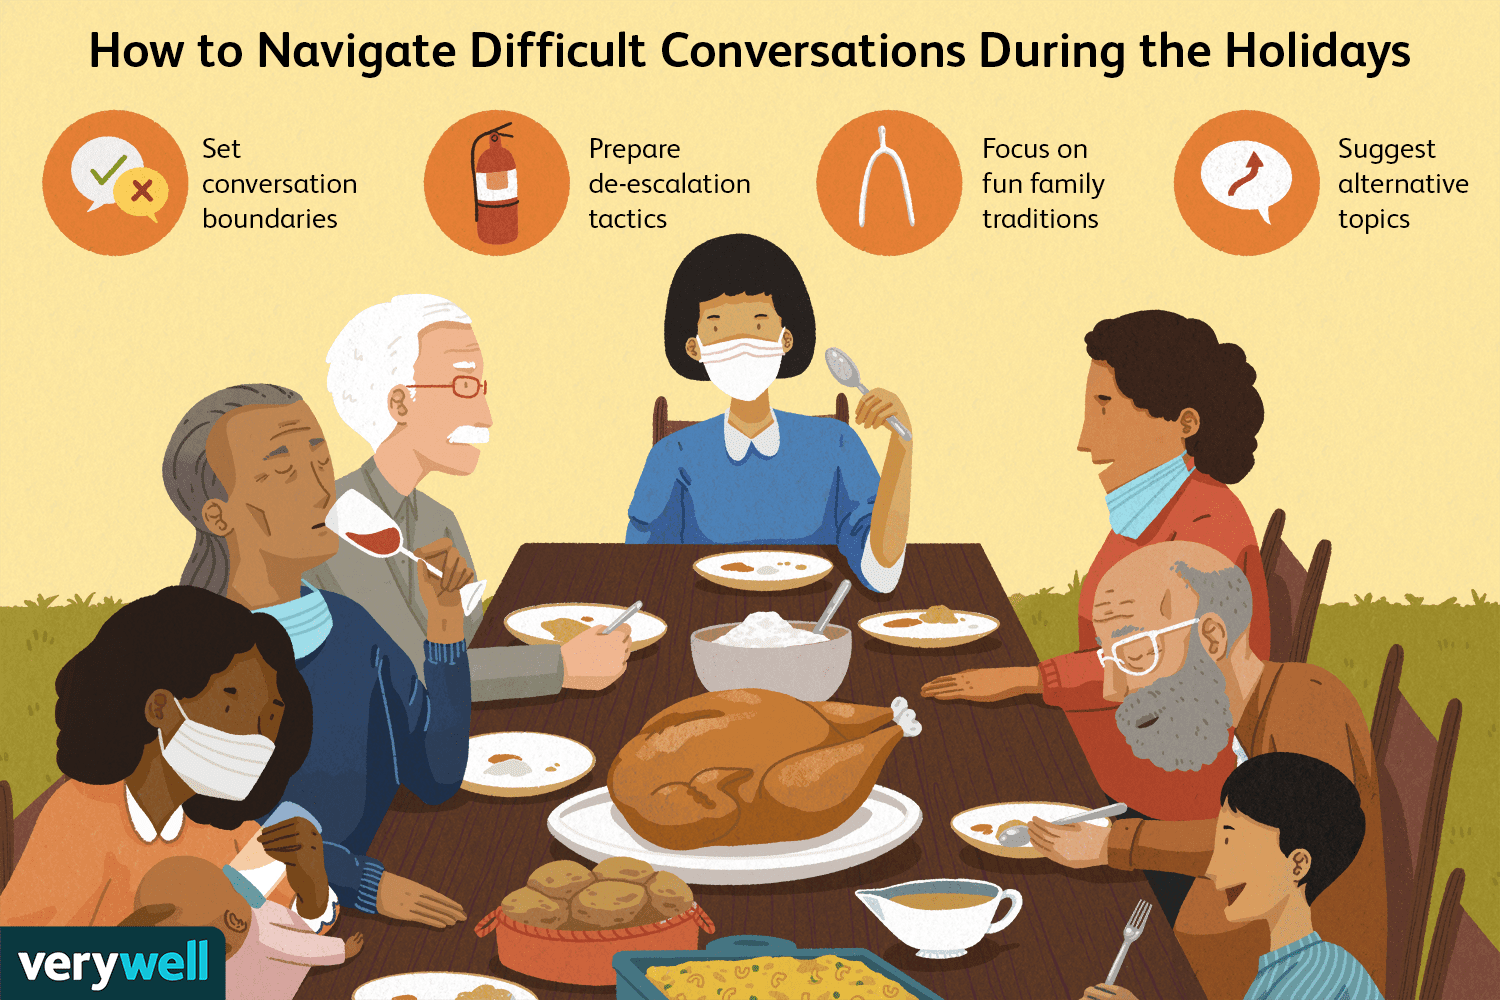 How to Navigate Difficult Conversations This Holiday Season